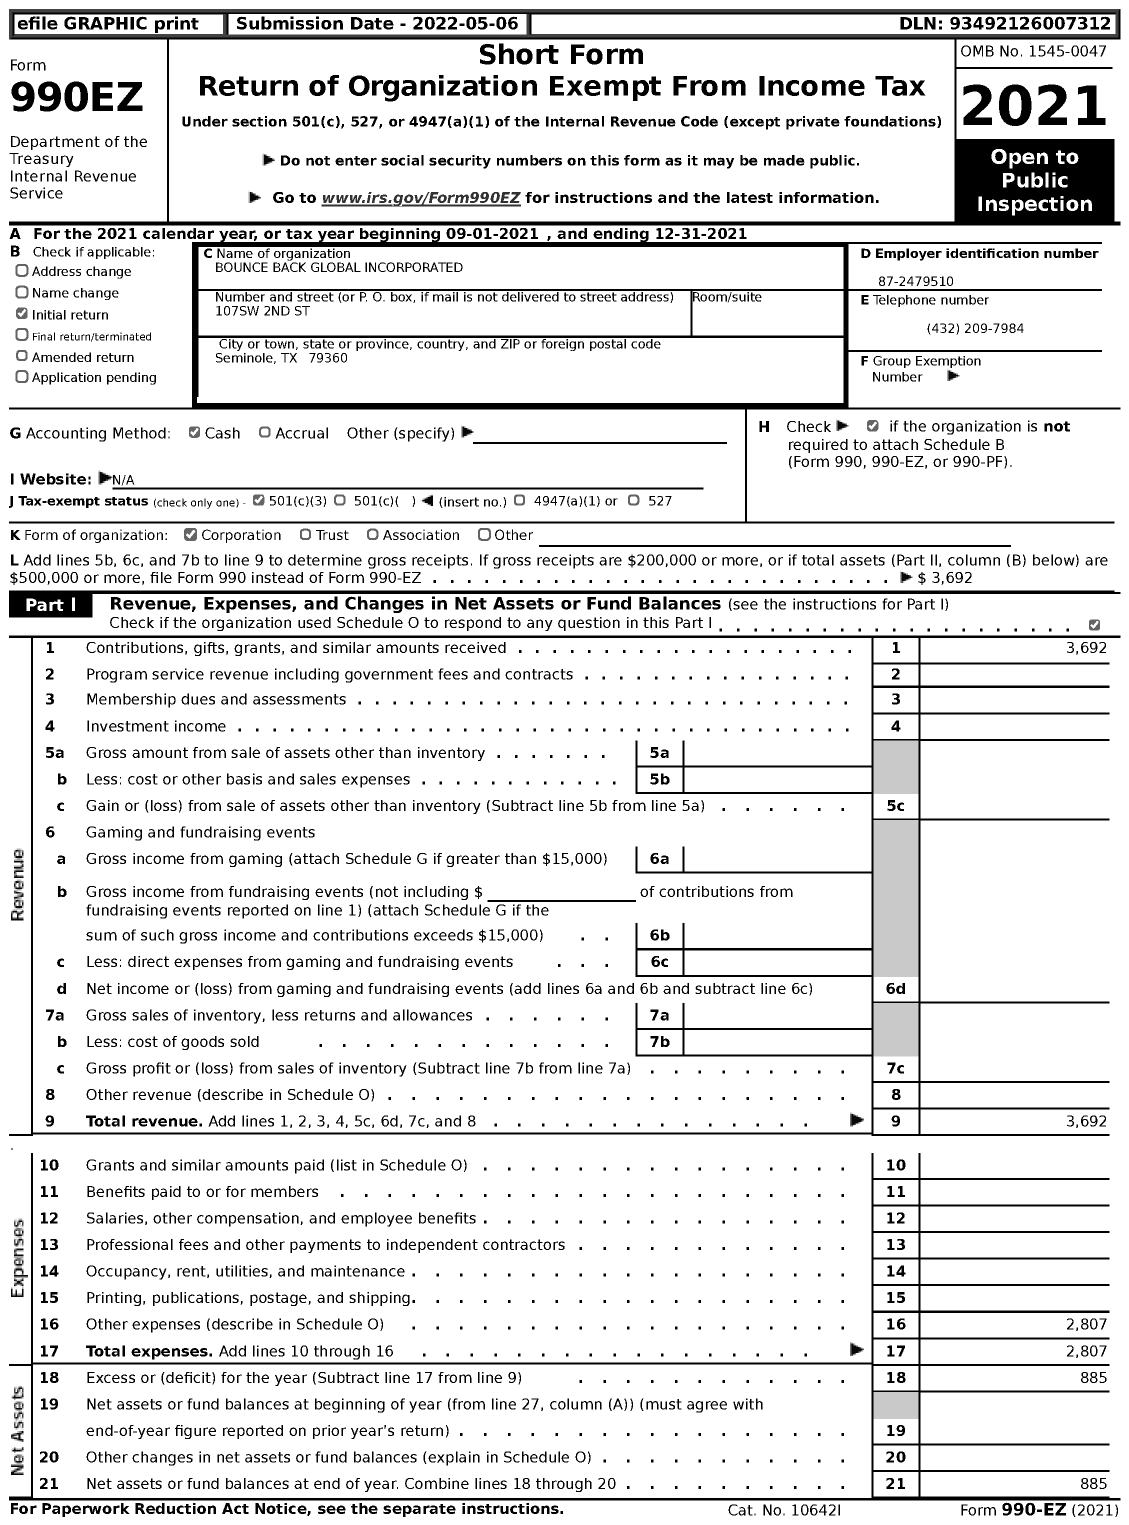 Image of first page of 2021 Form 990EZ for Bounce Back Global Incorporated